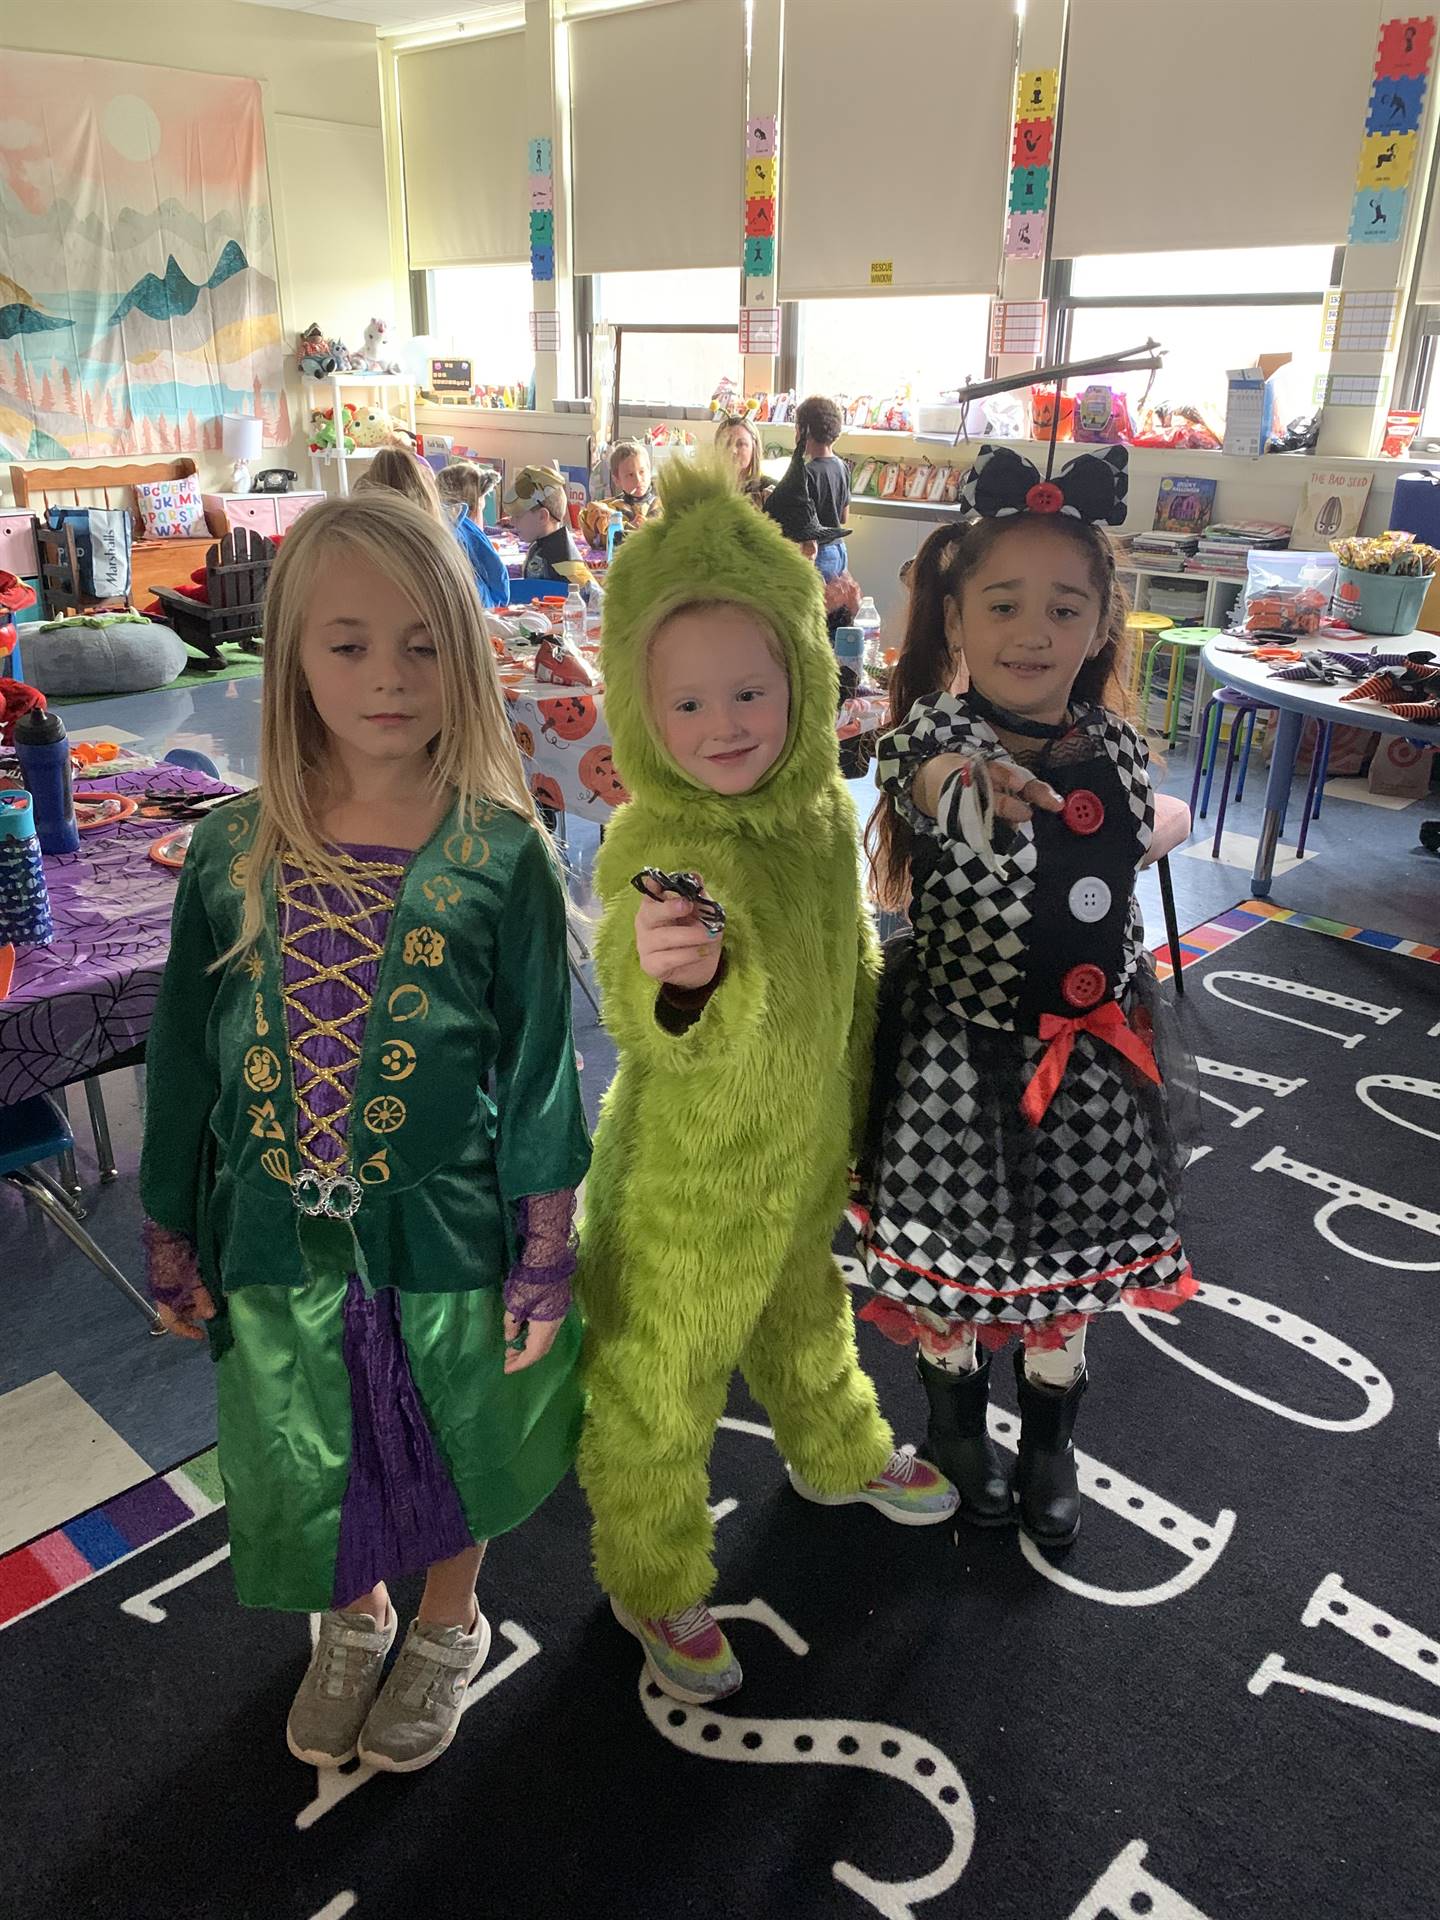 3 students dressed up